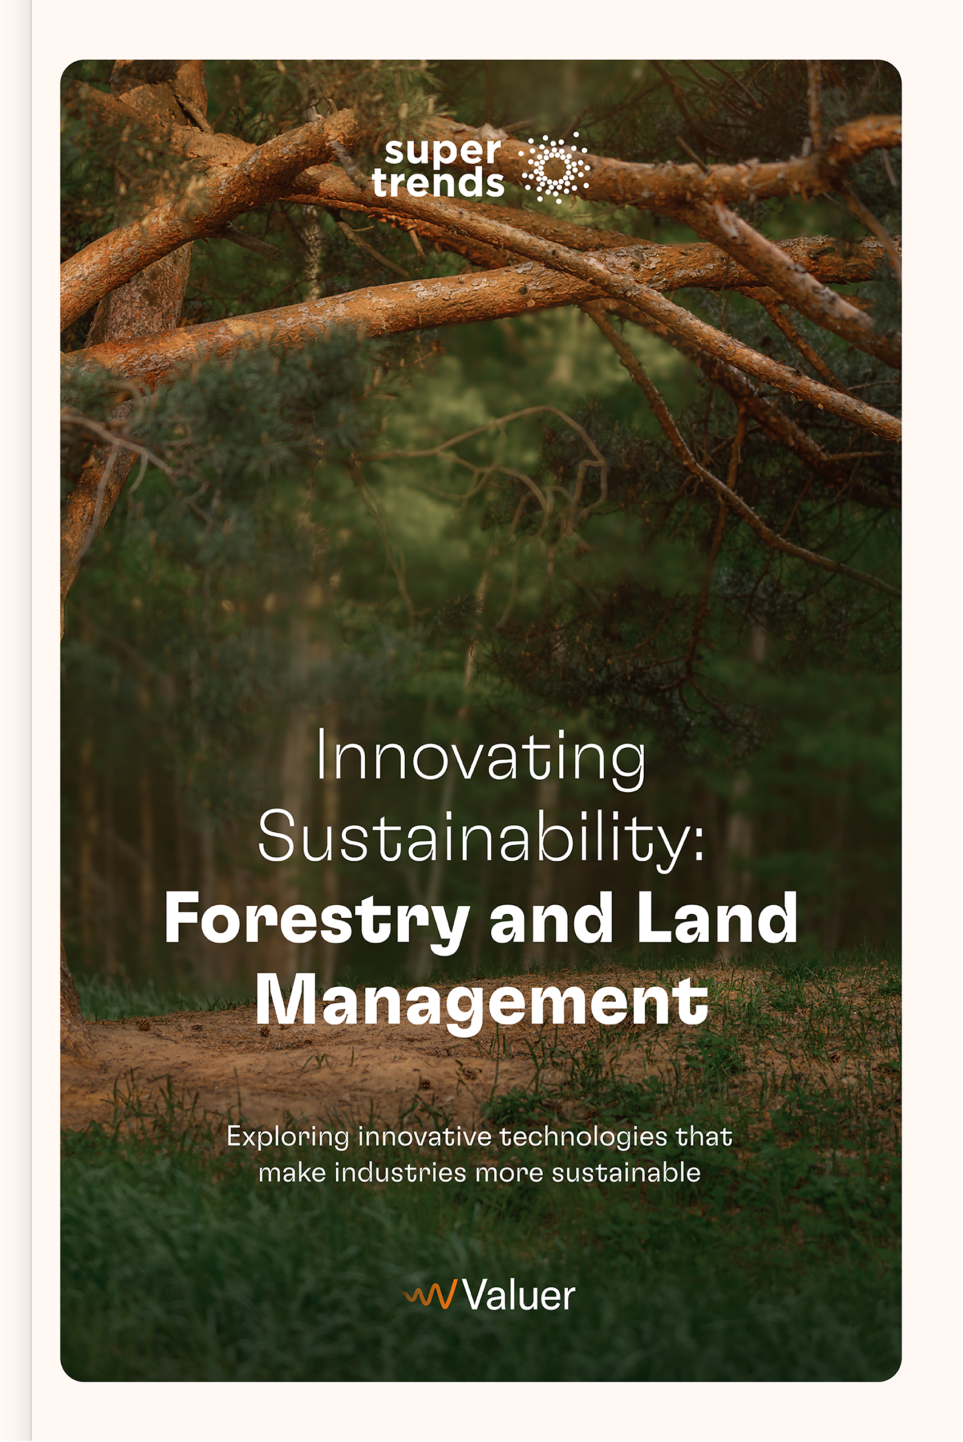 Front Cover of forestry and land management report